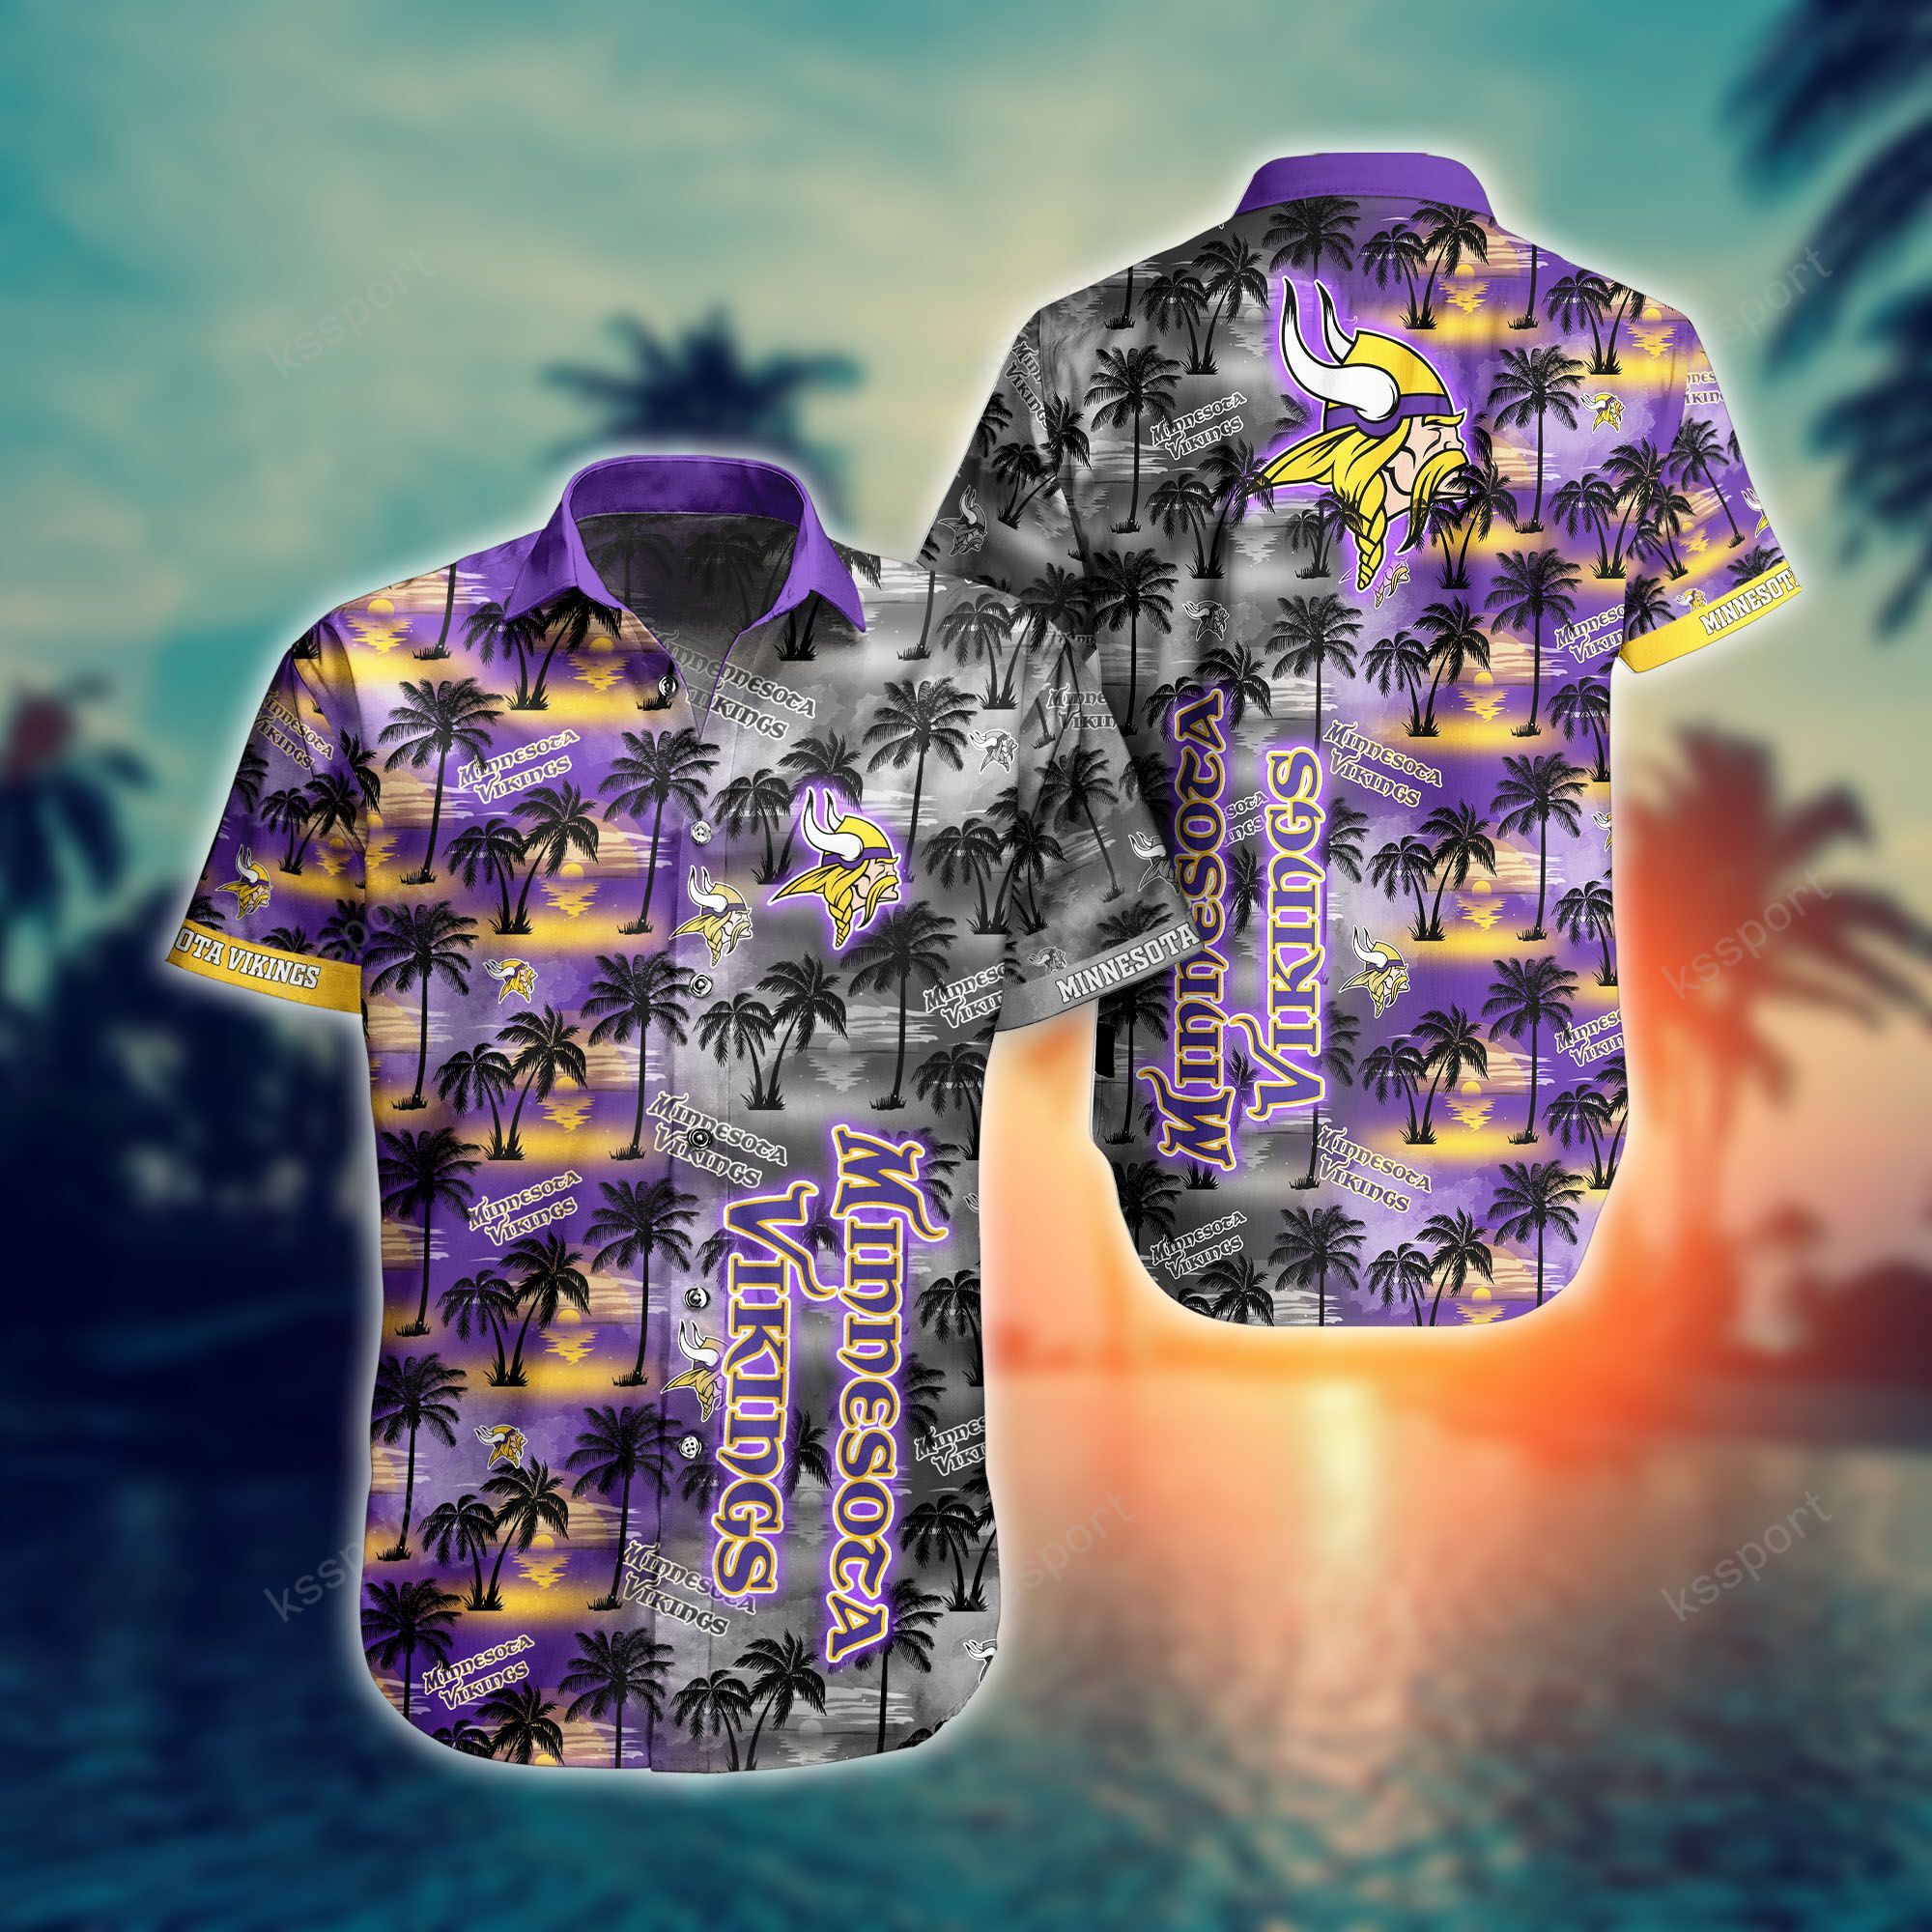 Treat yourself to a cool Hawaiian set today! 99